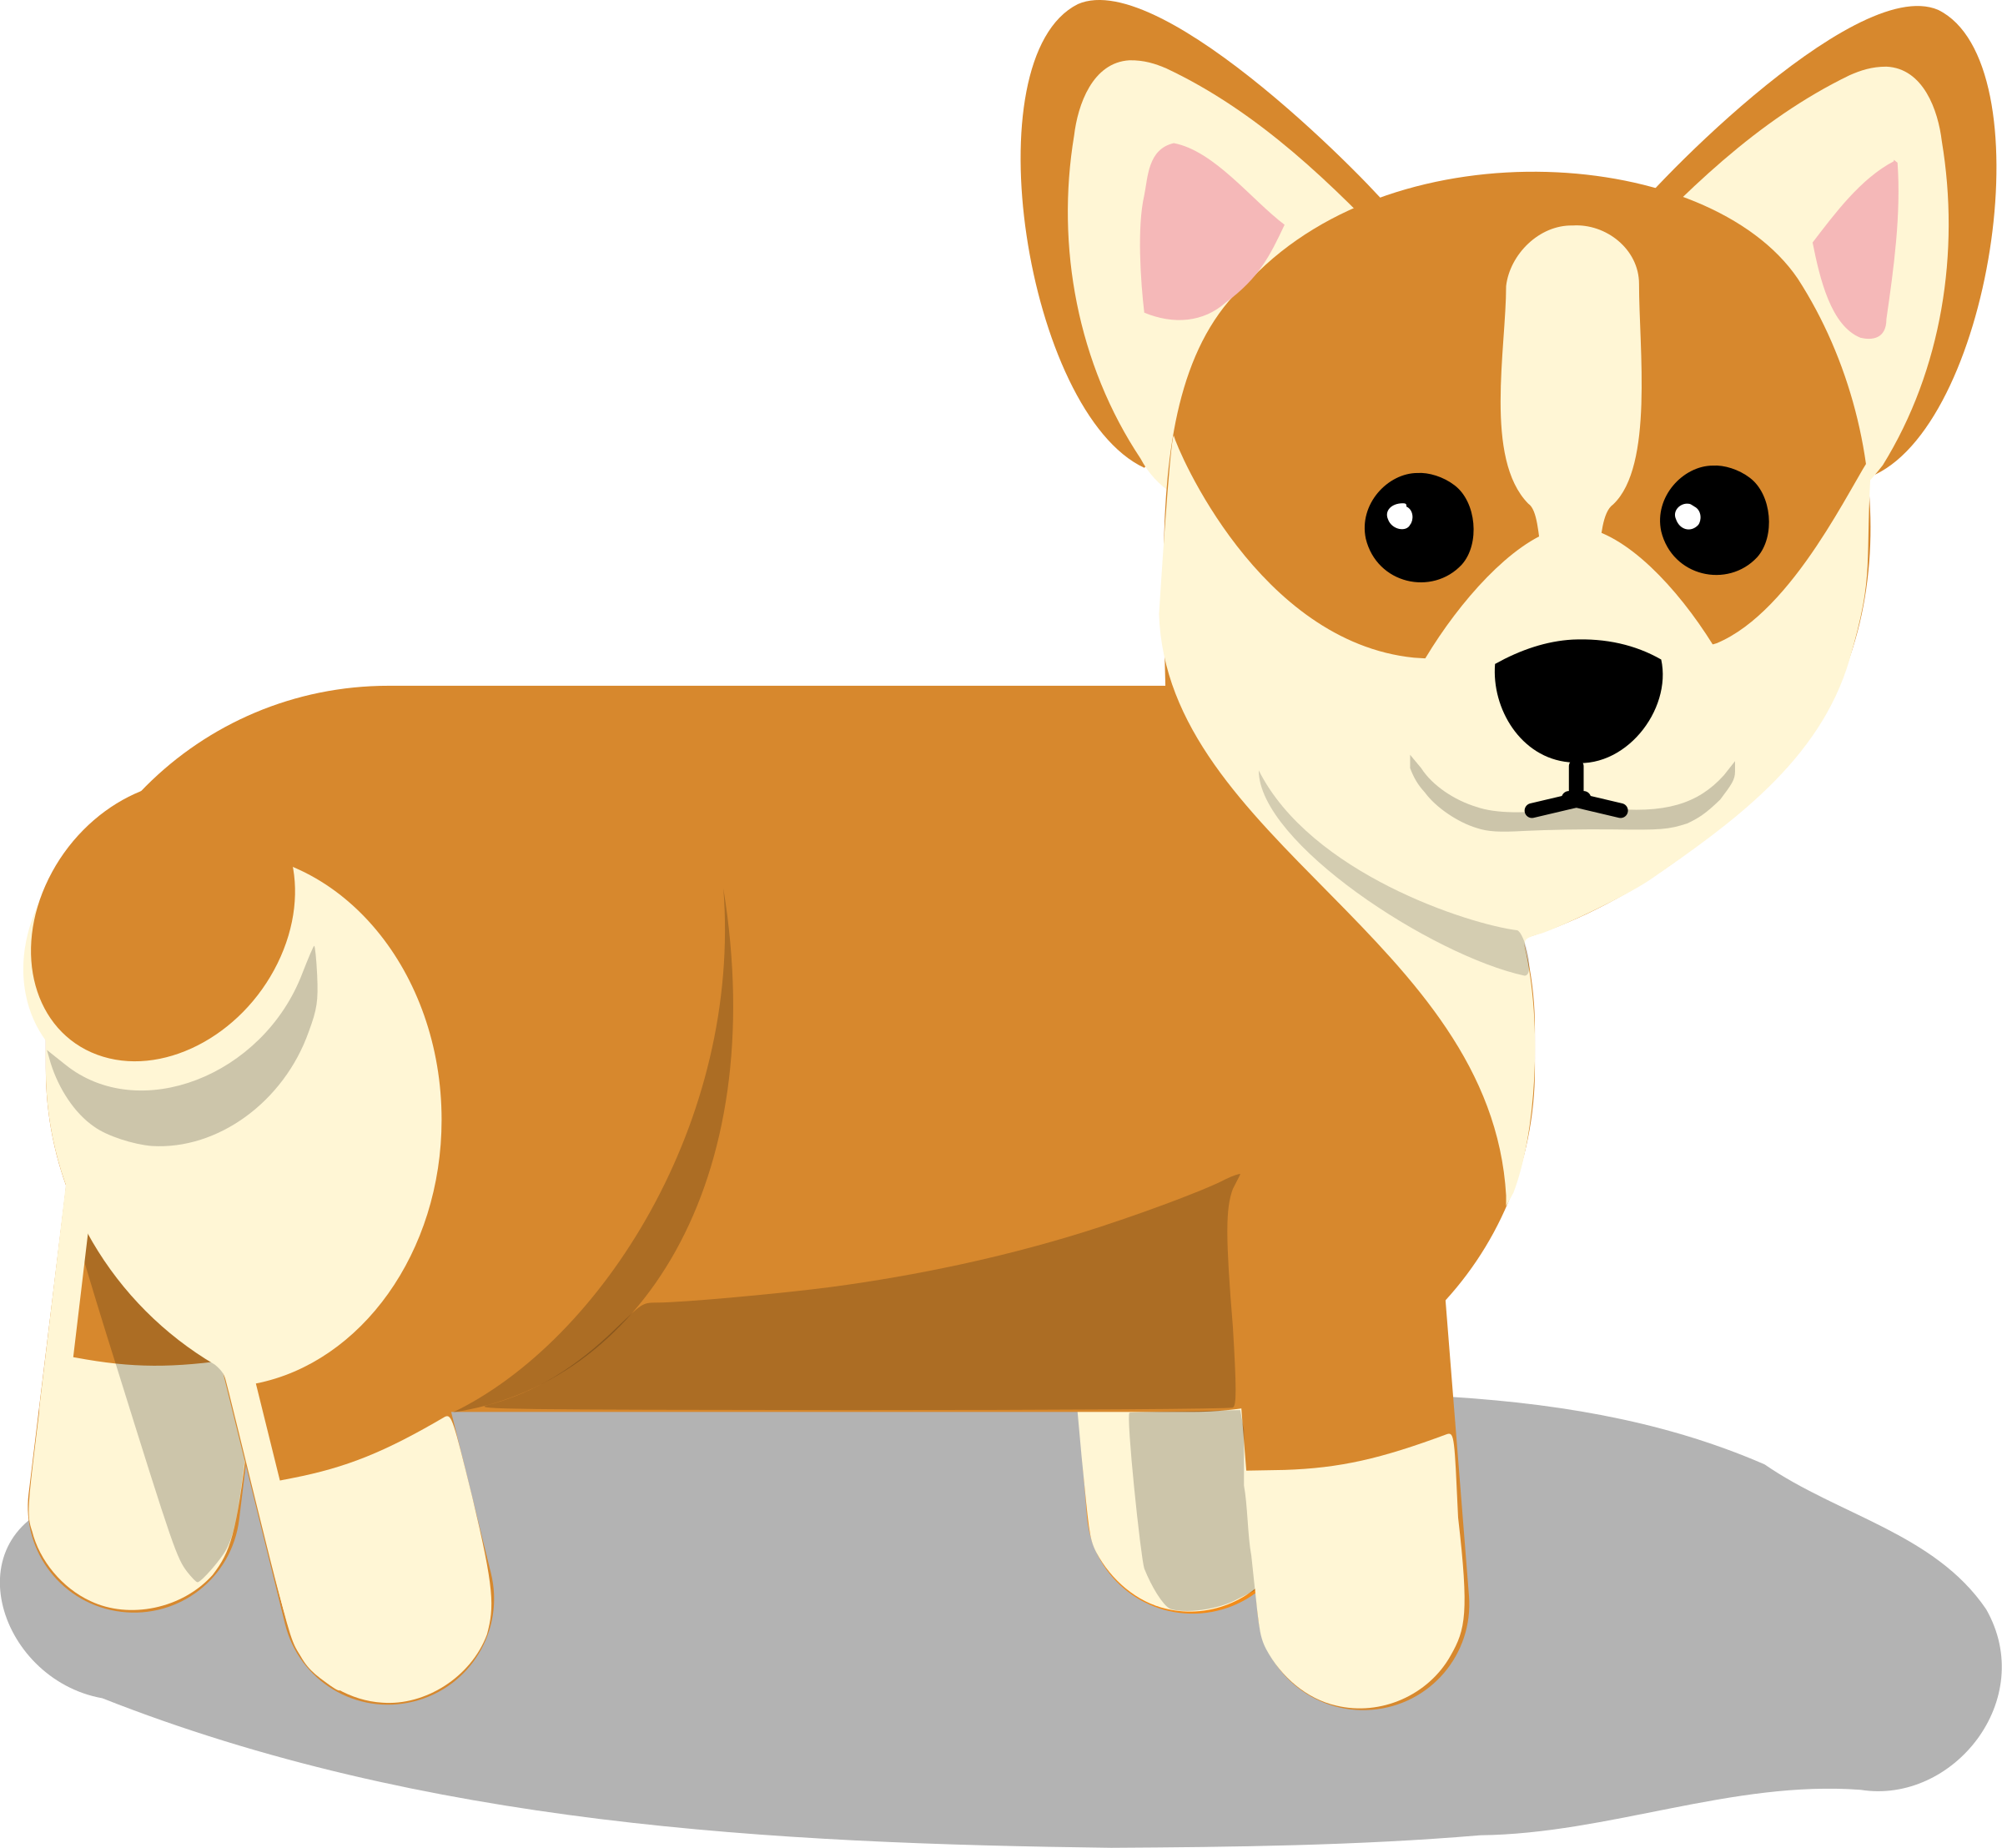 Free Dog Vector Cliparts, Download Free Dog Vector Cliparts png images